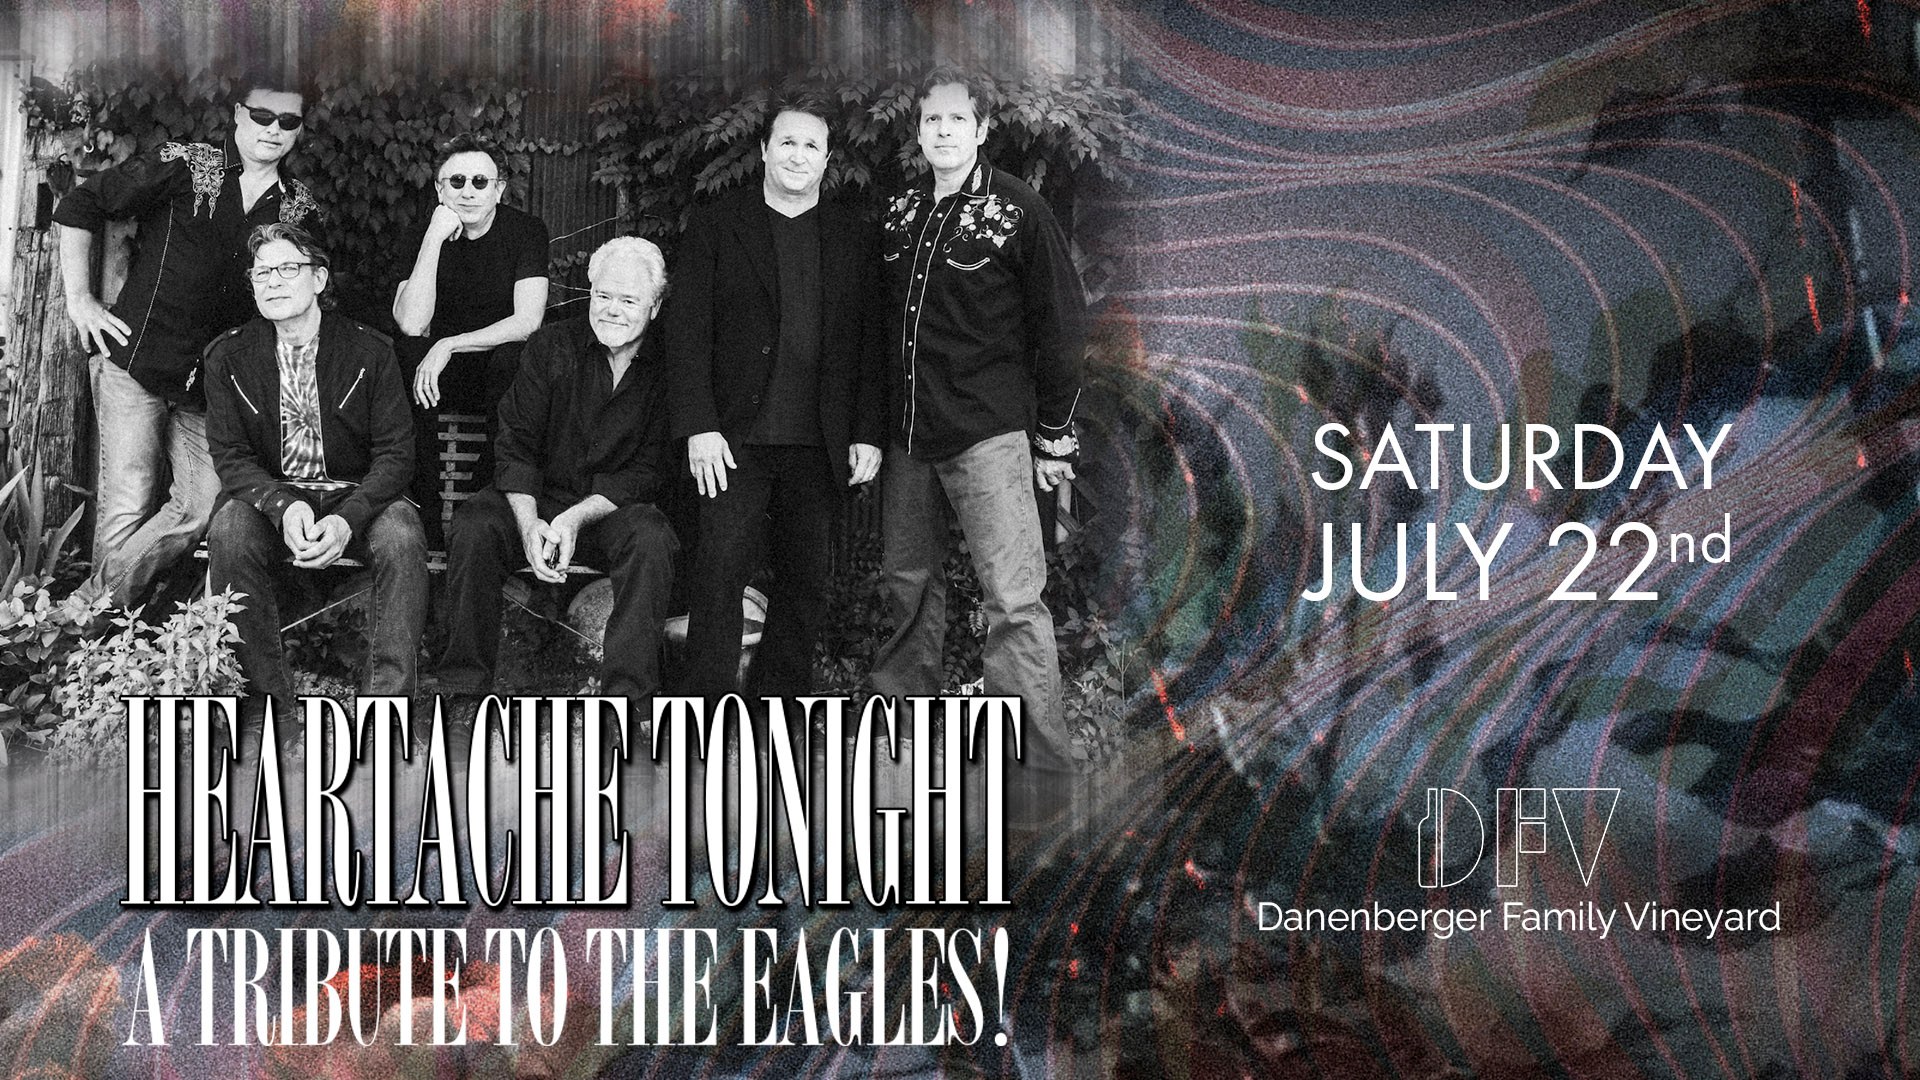 The Eagles Tribute - Heartache Tonight at Danenberger Family Vineyards